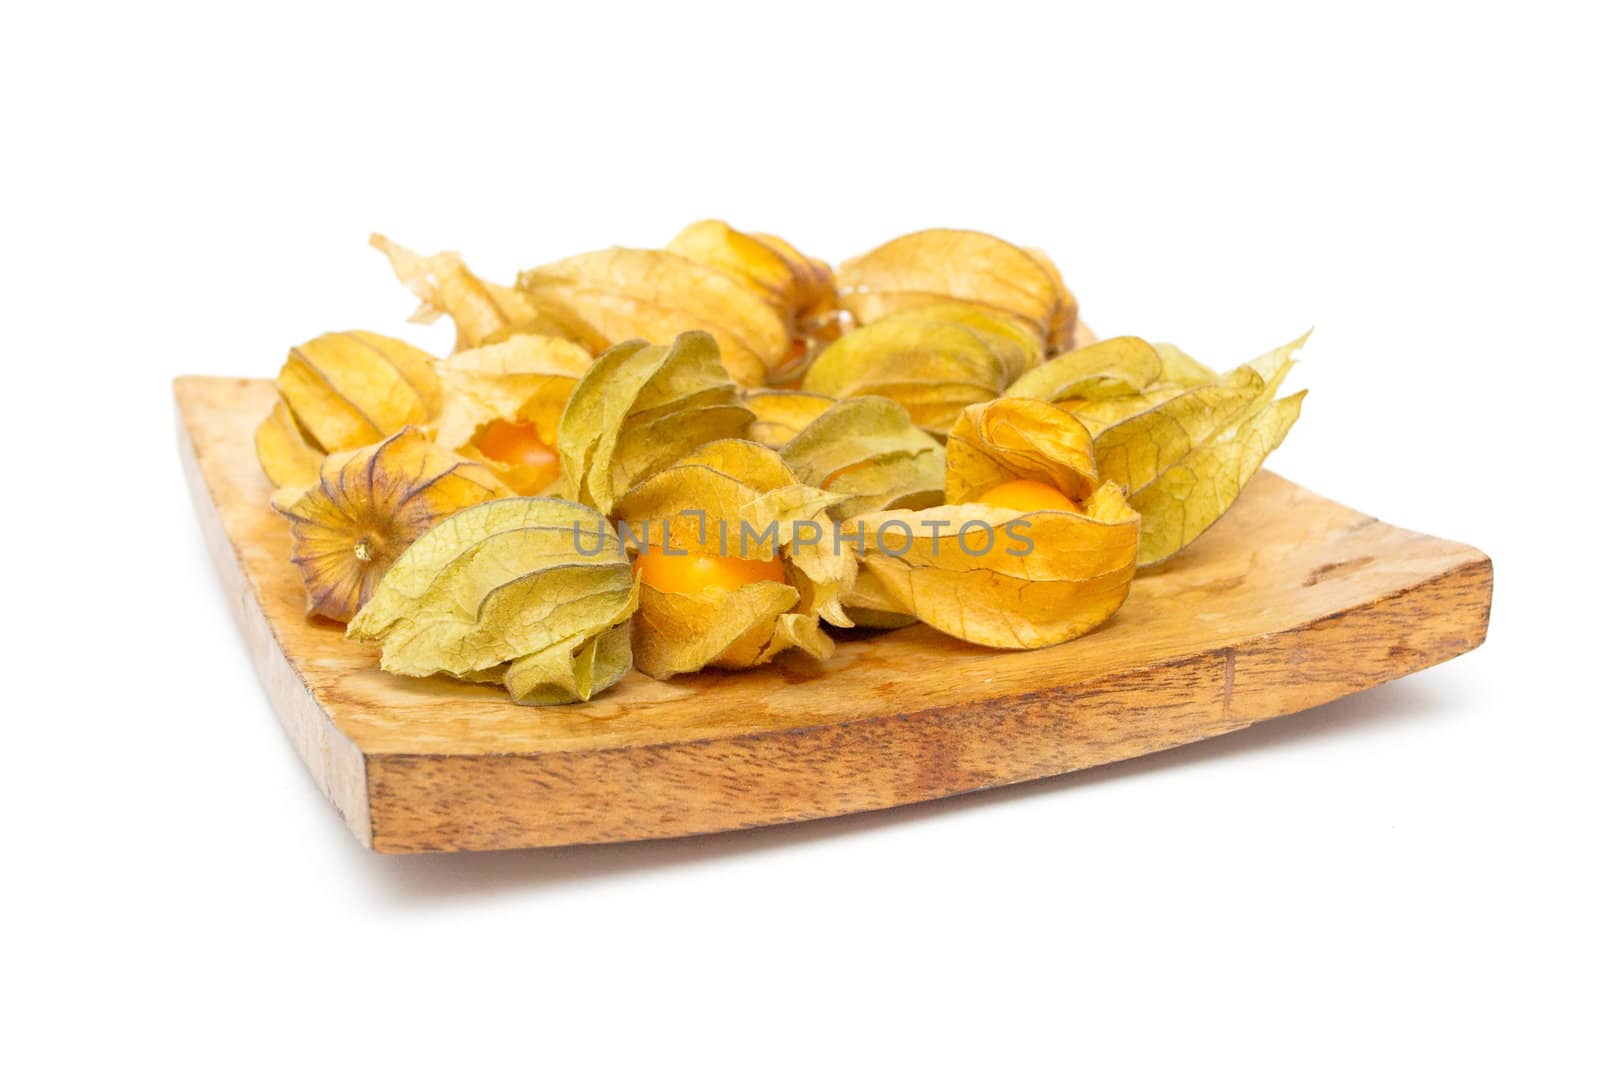 Physalis fruits on a wooden dish on white background